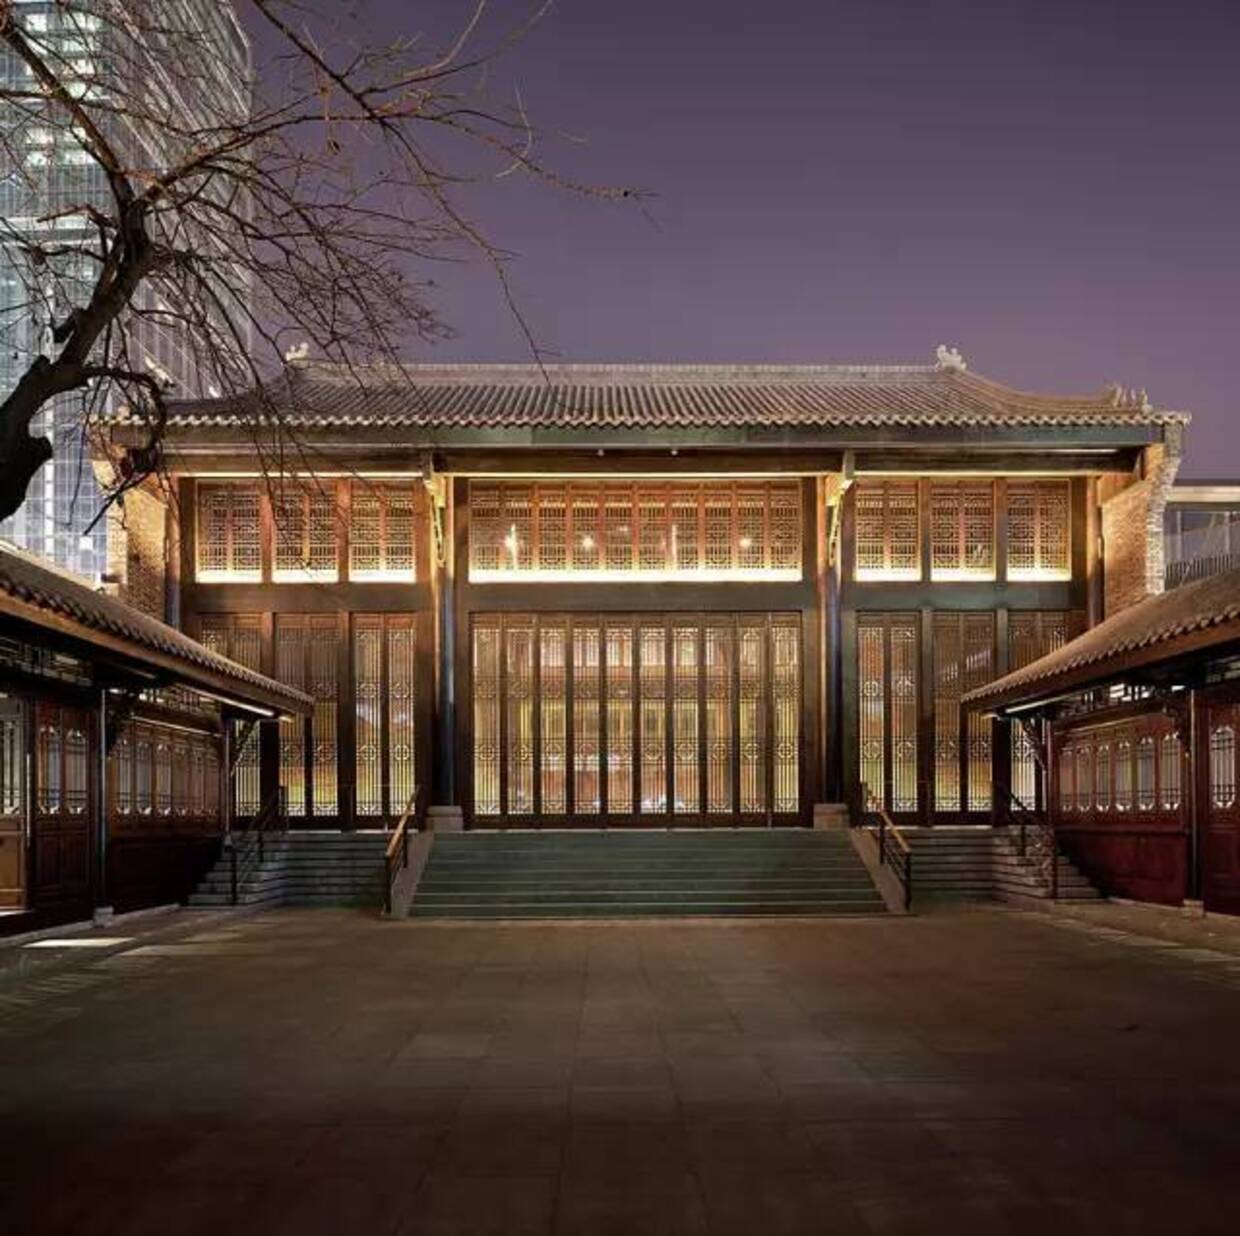 After extensive renovation, the Guangdong Hall was restored and brought back to its former glory.